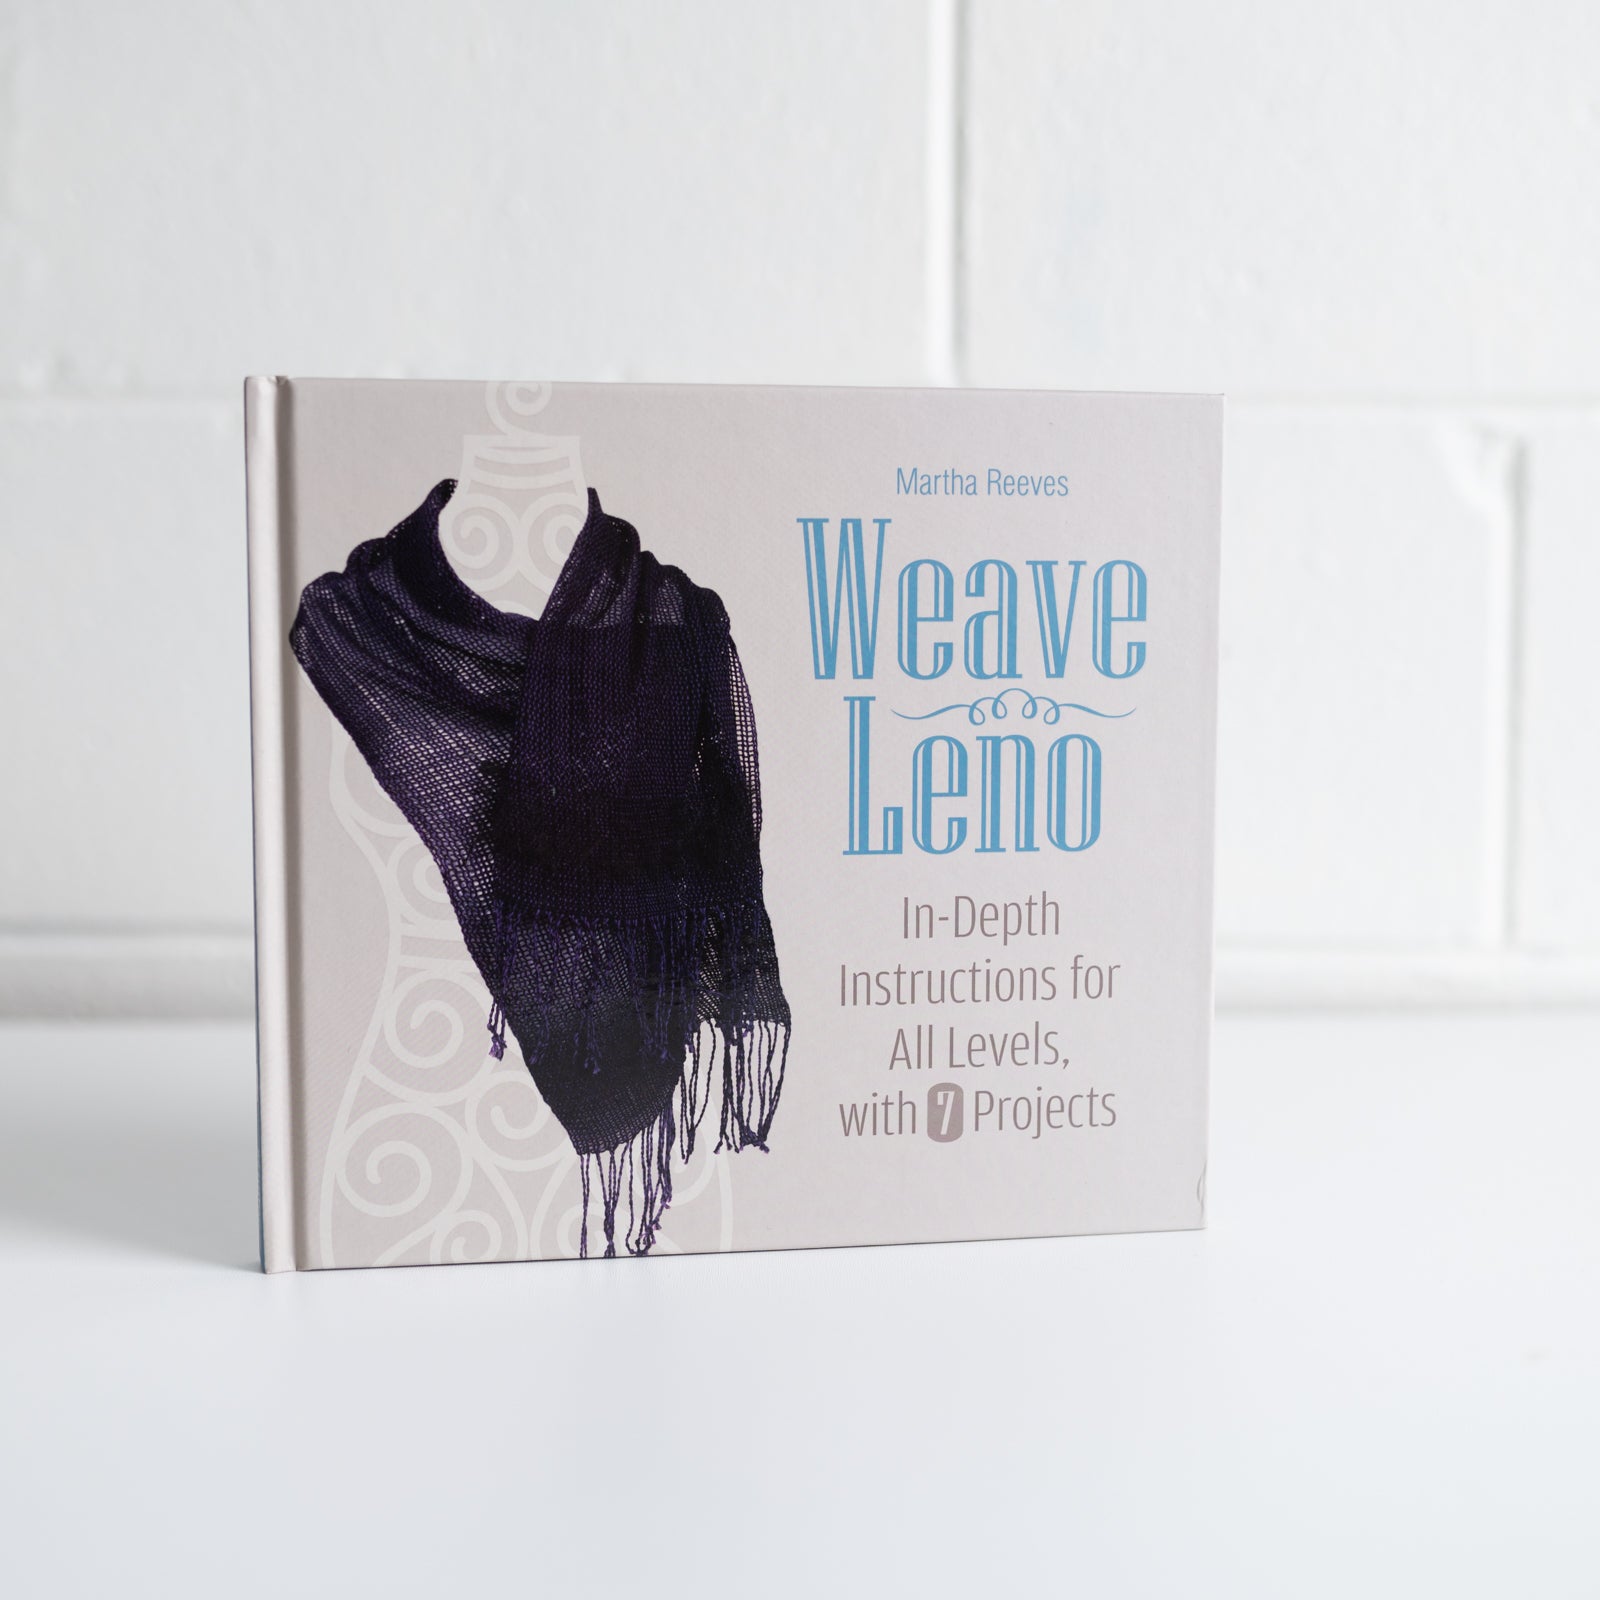 Weave Leno - In Depth Instructions for all Levels